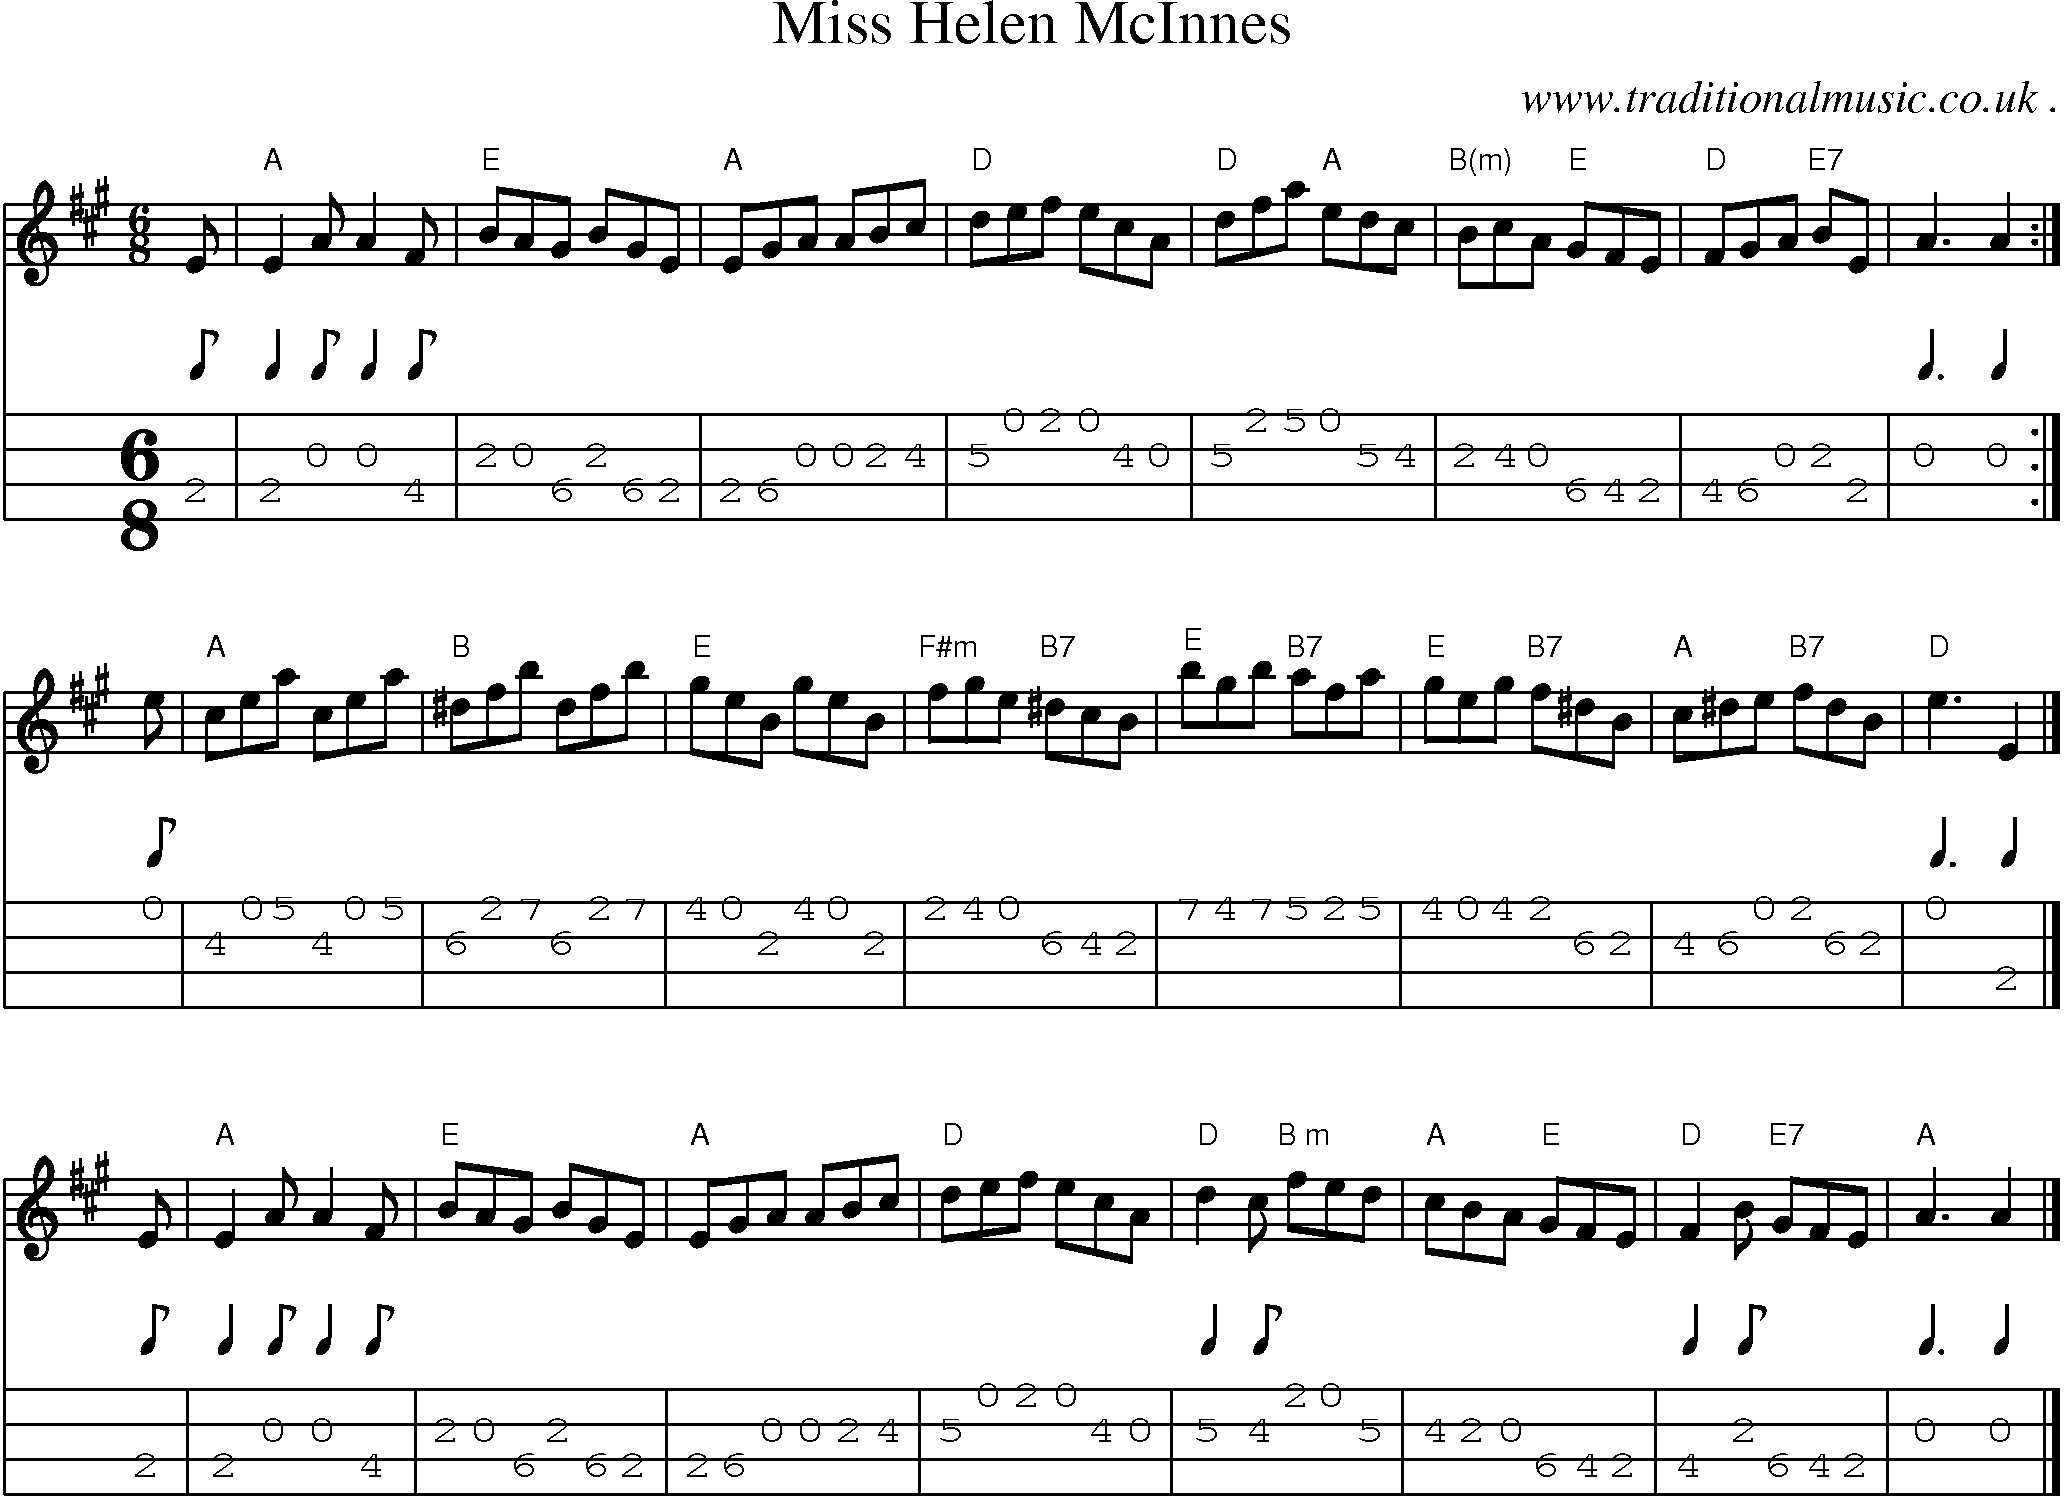 Sheet-music  score, Chords and Mandolin Tabs for Miss Helen Mcinnes